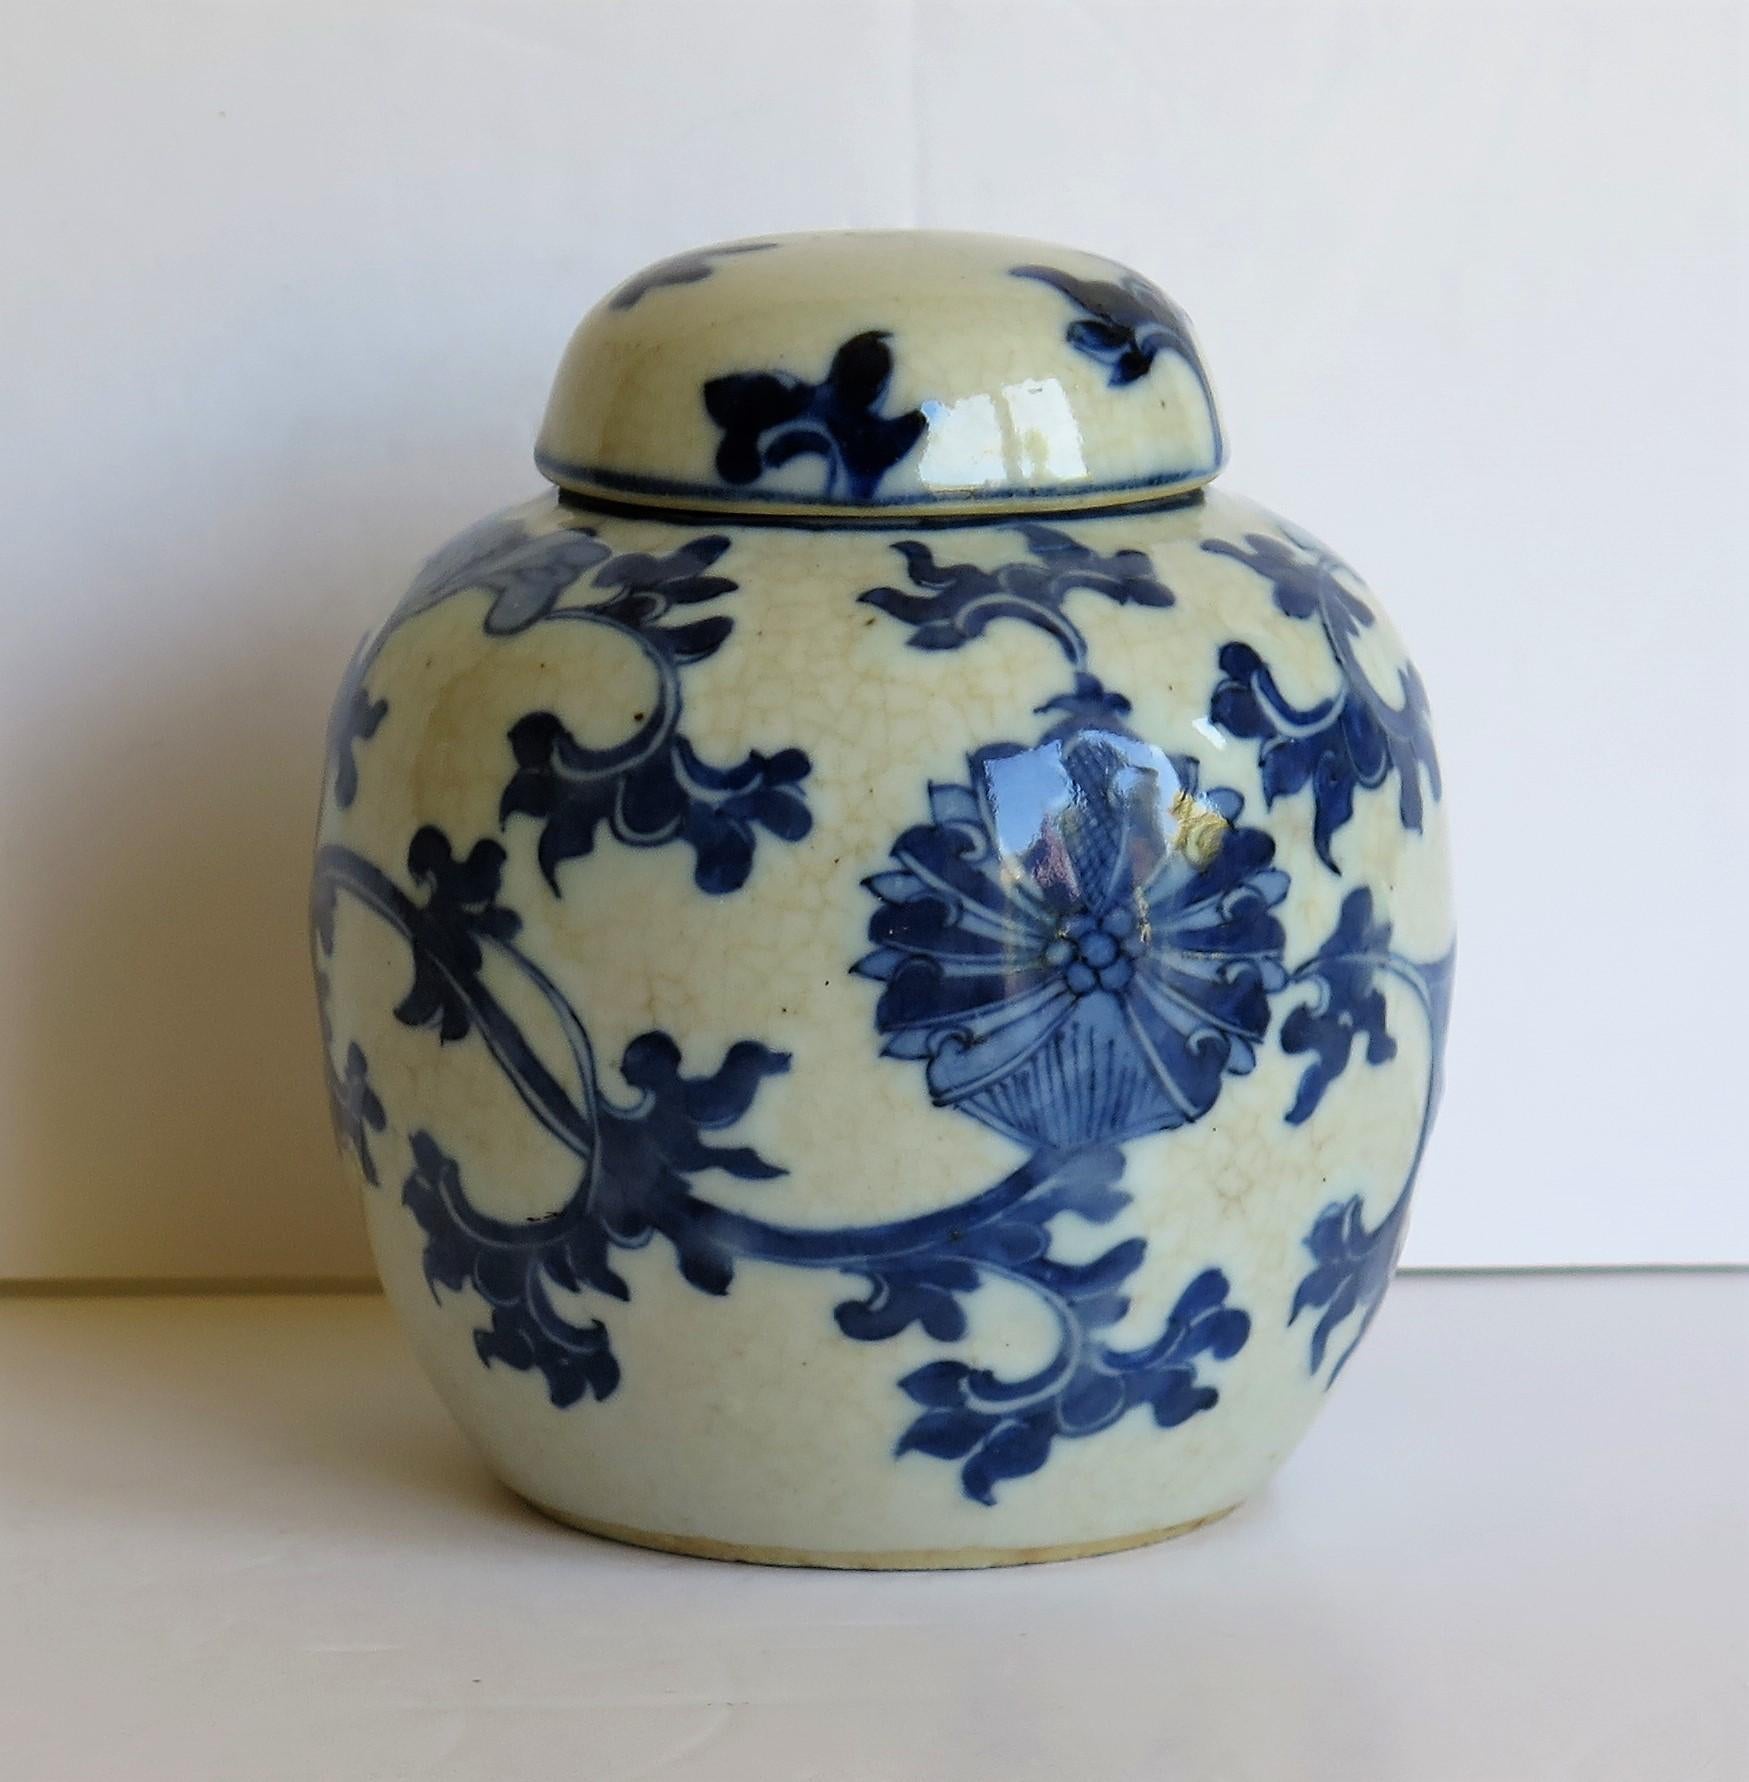 This is a very decorative Chinese Export moulded porcelain blue and white lidded jar or Ginger Jar with a hand painted floral vine scene, dating to the Qing period, early or mid-19th century.

The jar is hand potted with the porcelain moulded or